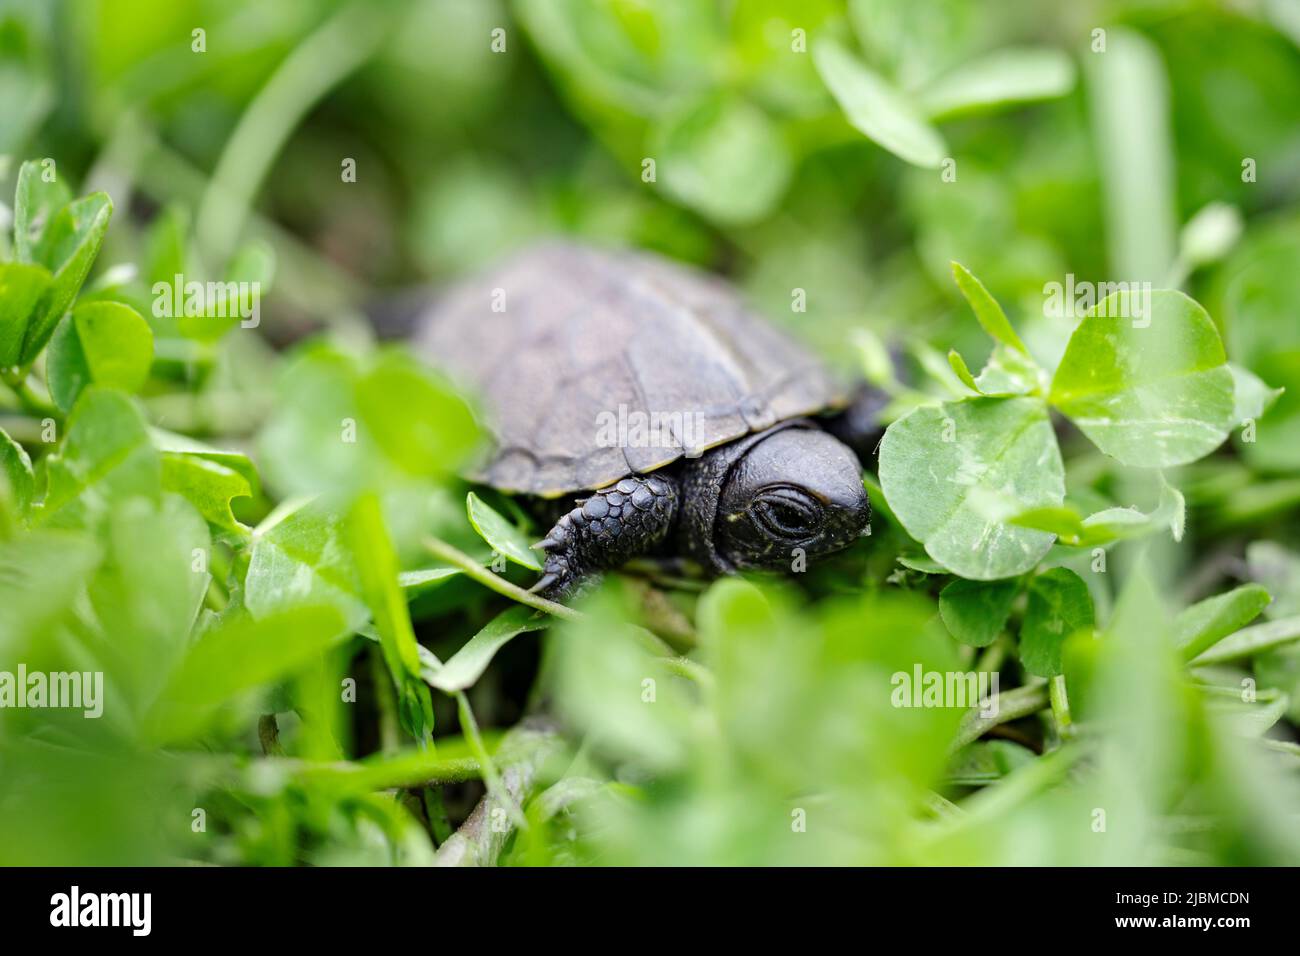 Baby turtle is in the midst of thick green grass Stock Photo